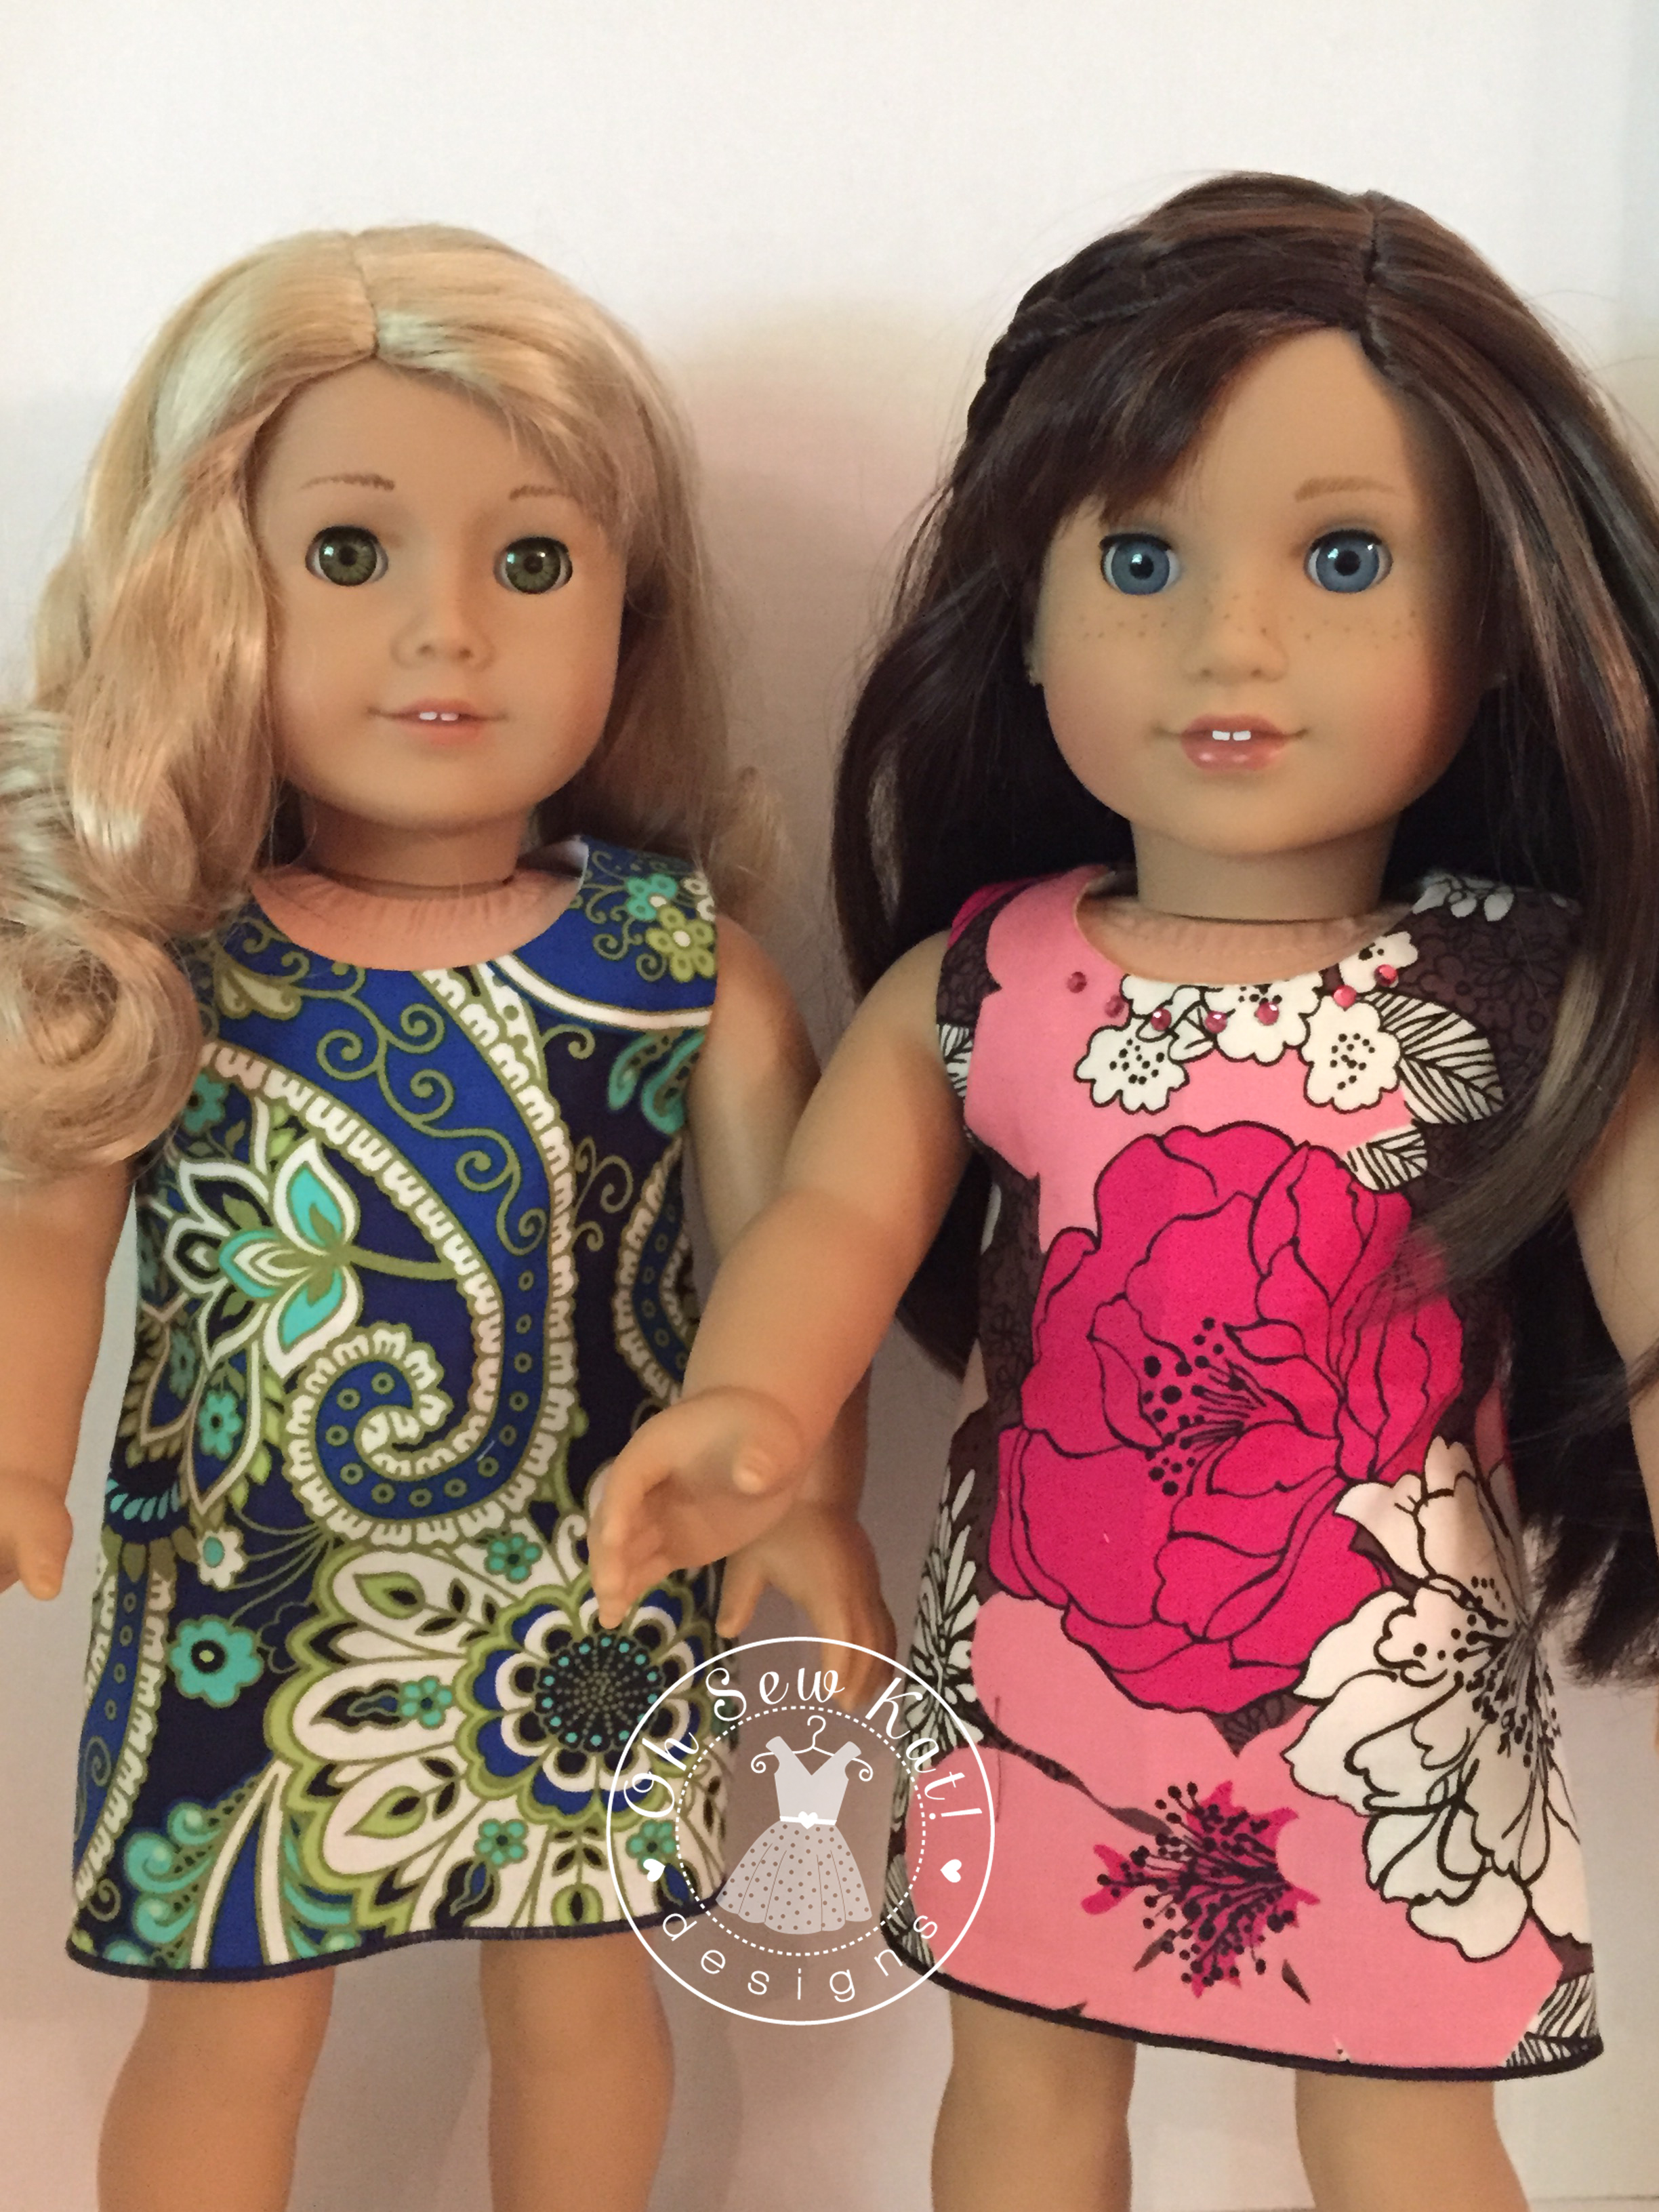 Make a simple summer dress for your 18 inch doll with the Sunshine Dress PDF Pattern from OhSewKat! Also available for 14 inch dolls like Wellie Wishers from American Girl. #dollclothes #sewingpattern #summerclothes #dolloutfit #sunshinedress #ohsewkat